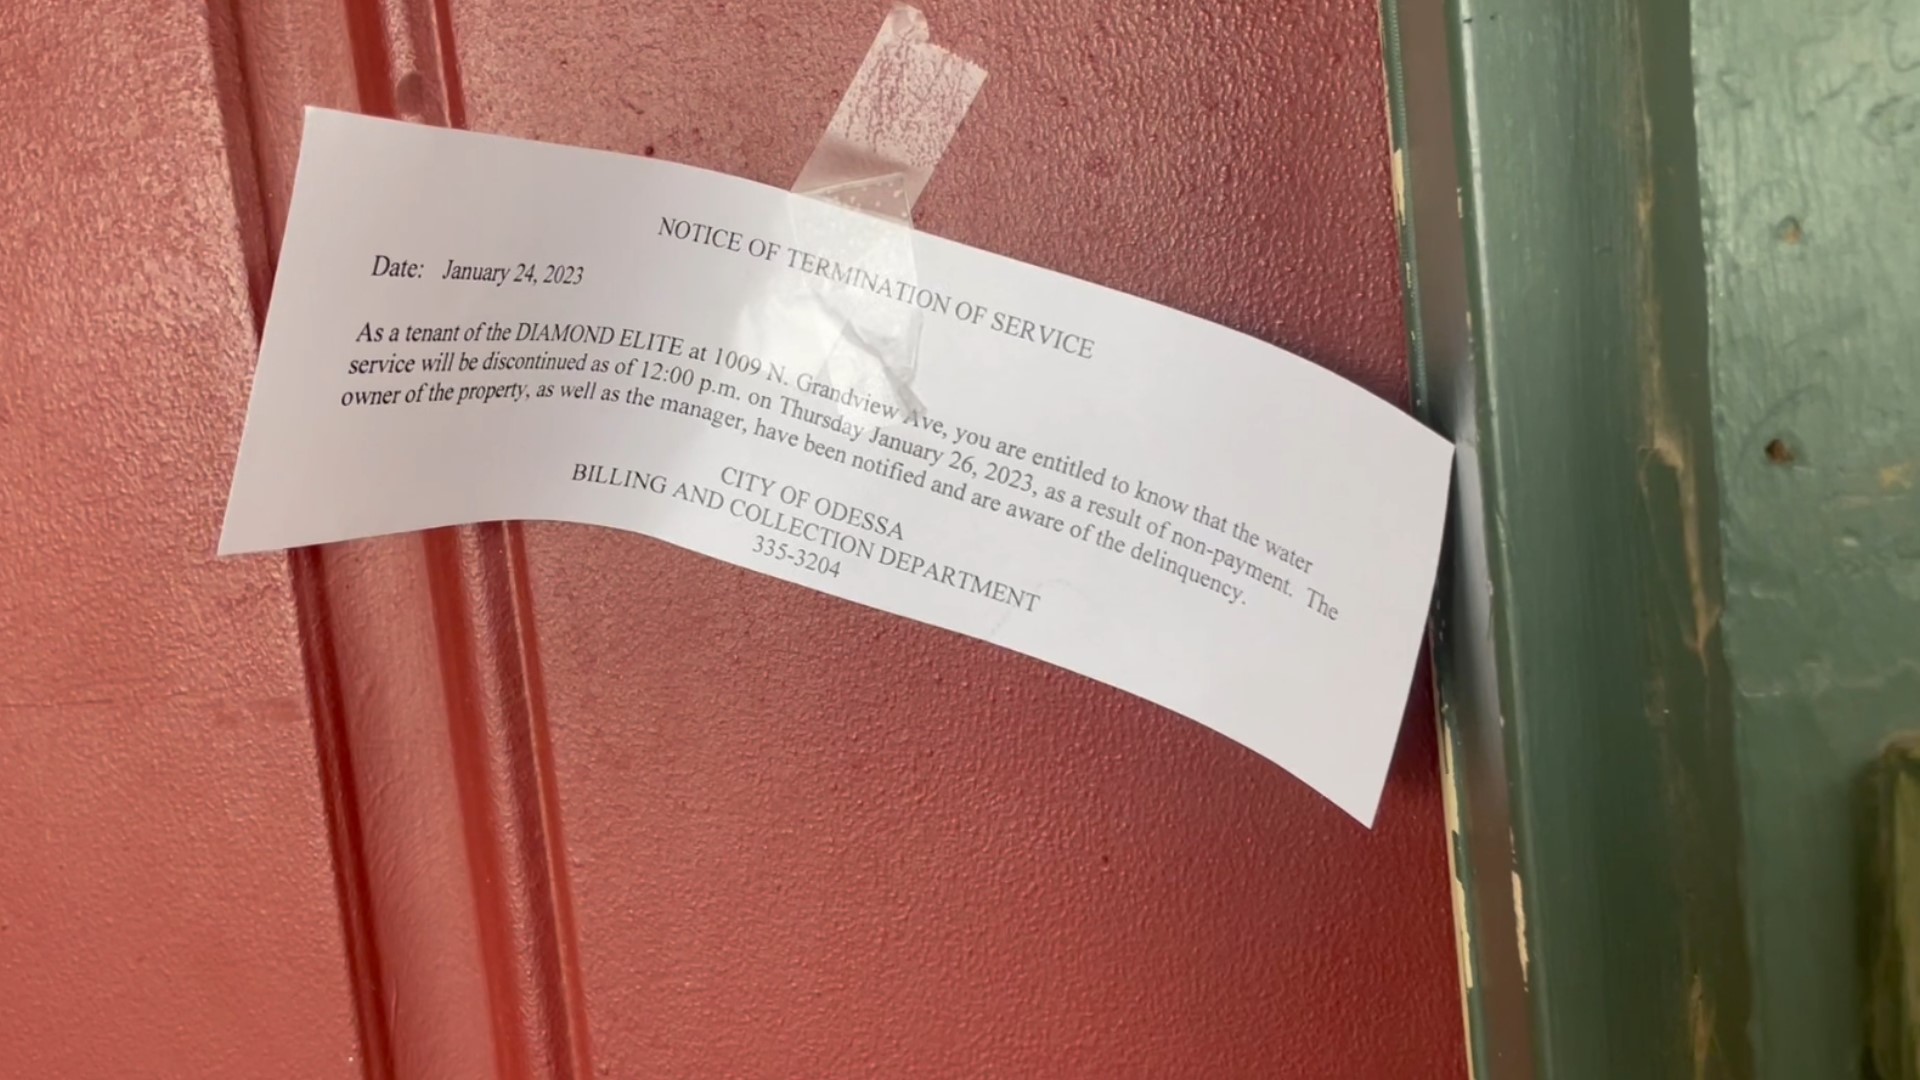 Residents at the Wellington Commons apartment complex in Odessa received a notice that their water will be shut of due to non-payment from the property managers.